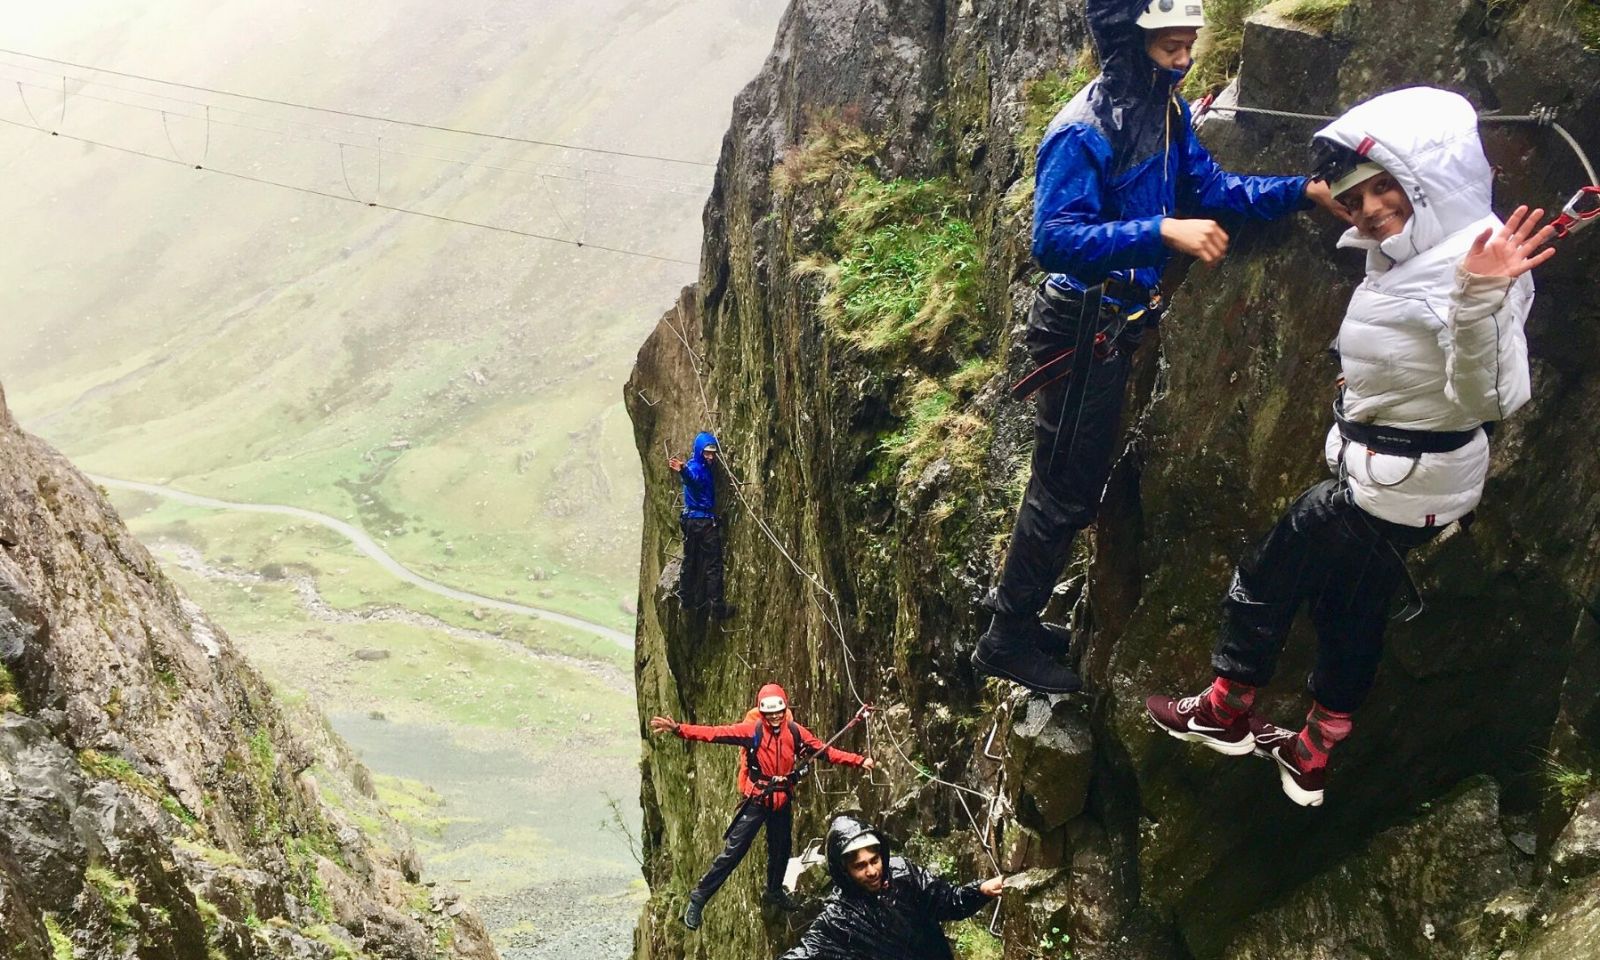 Group of young people enjoying the Via Ferrata at Honister Slate Mine.